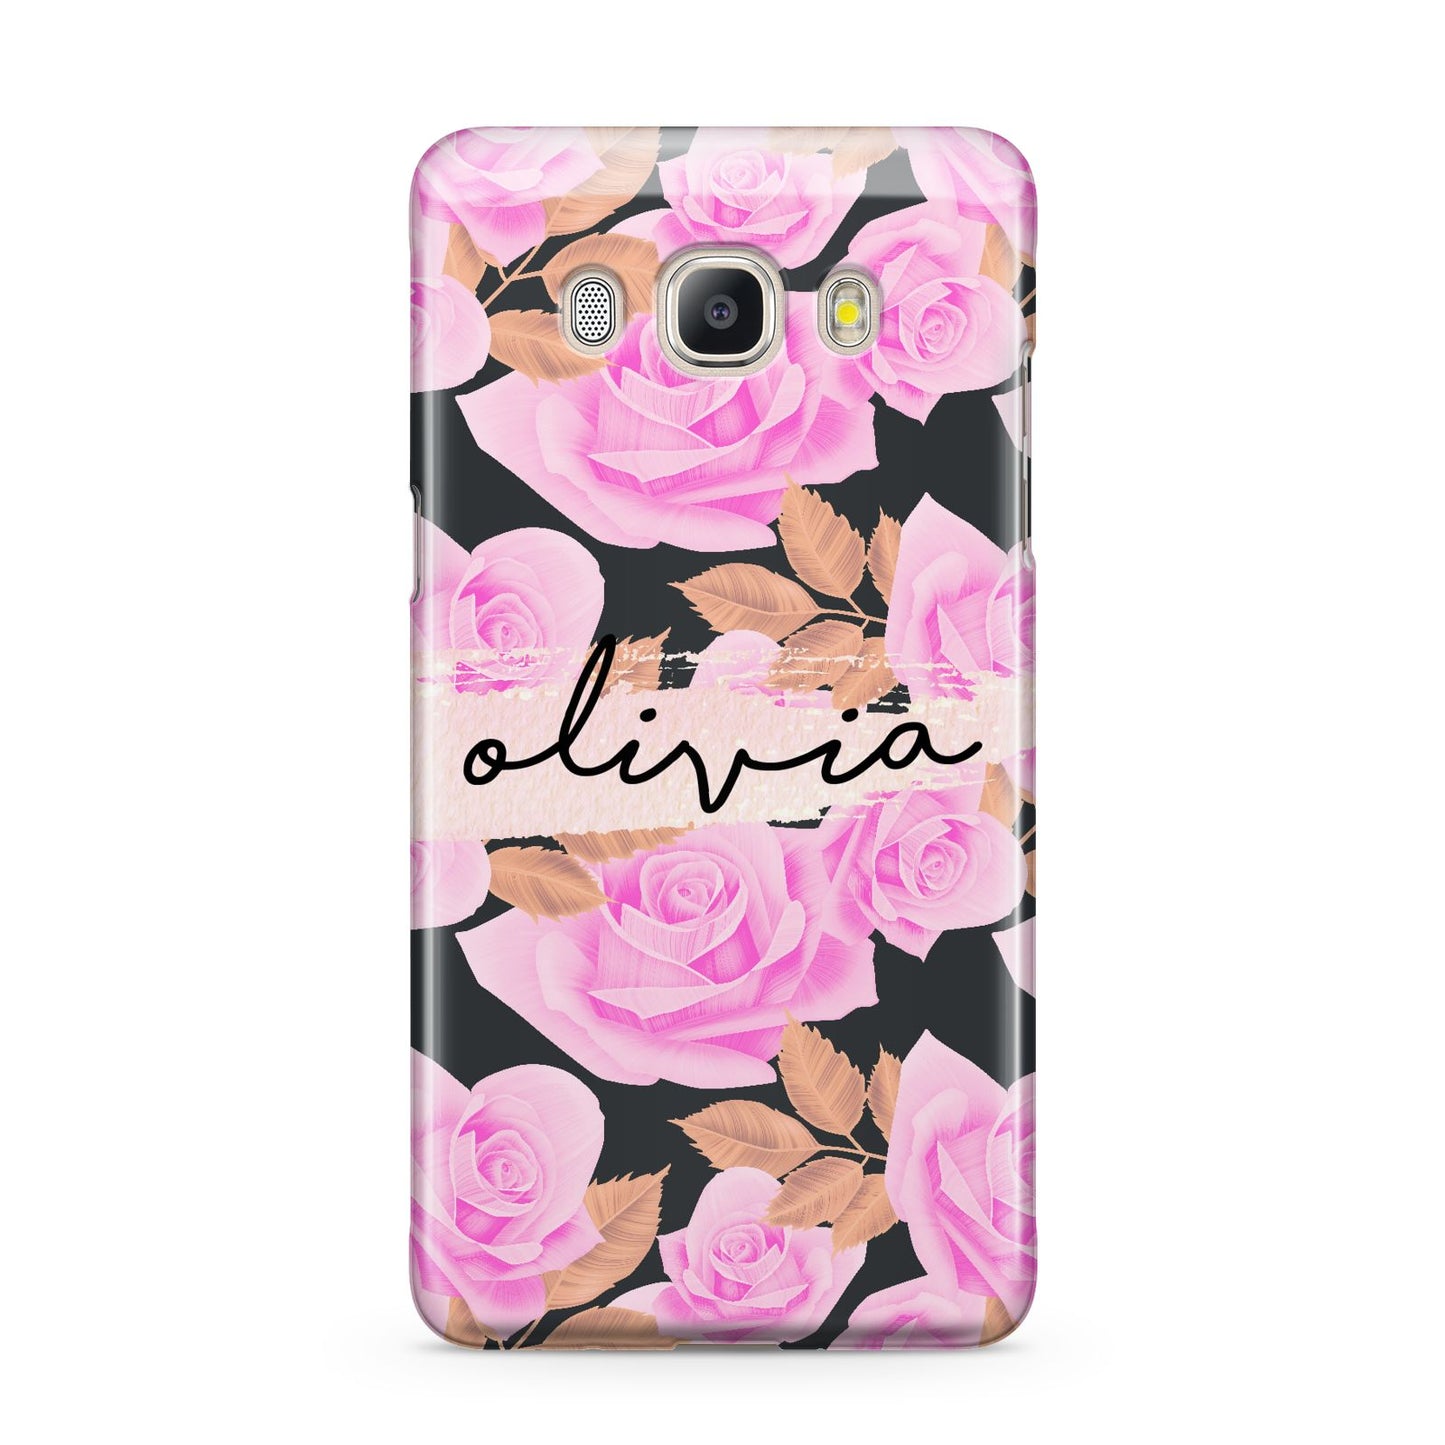 Personalised Floral Pink Roses Samsung Galaxy J5 2016 Case